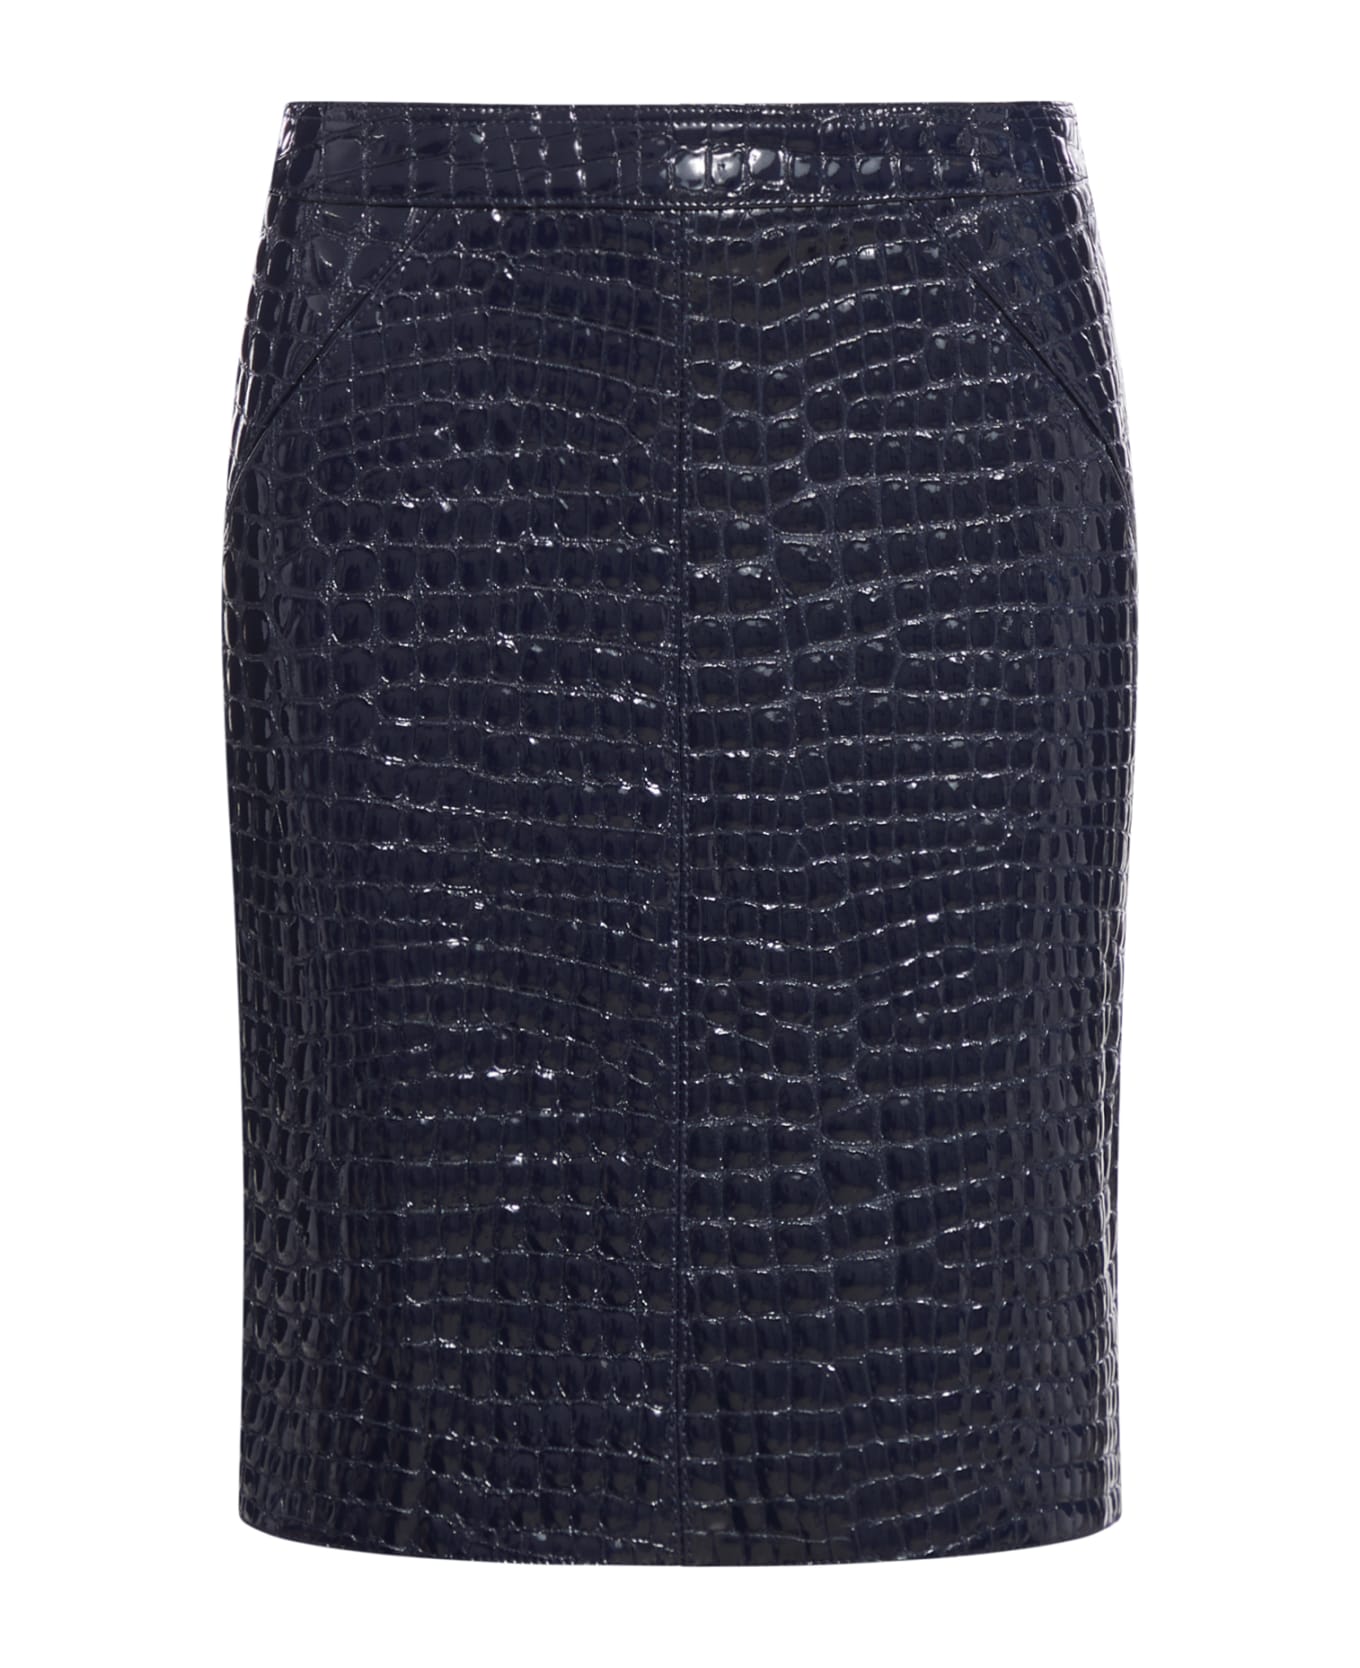 Tom Ford Glossy Croco Embossed Goat Leather Skirt - Deep Blue